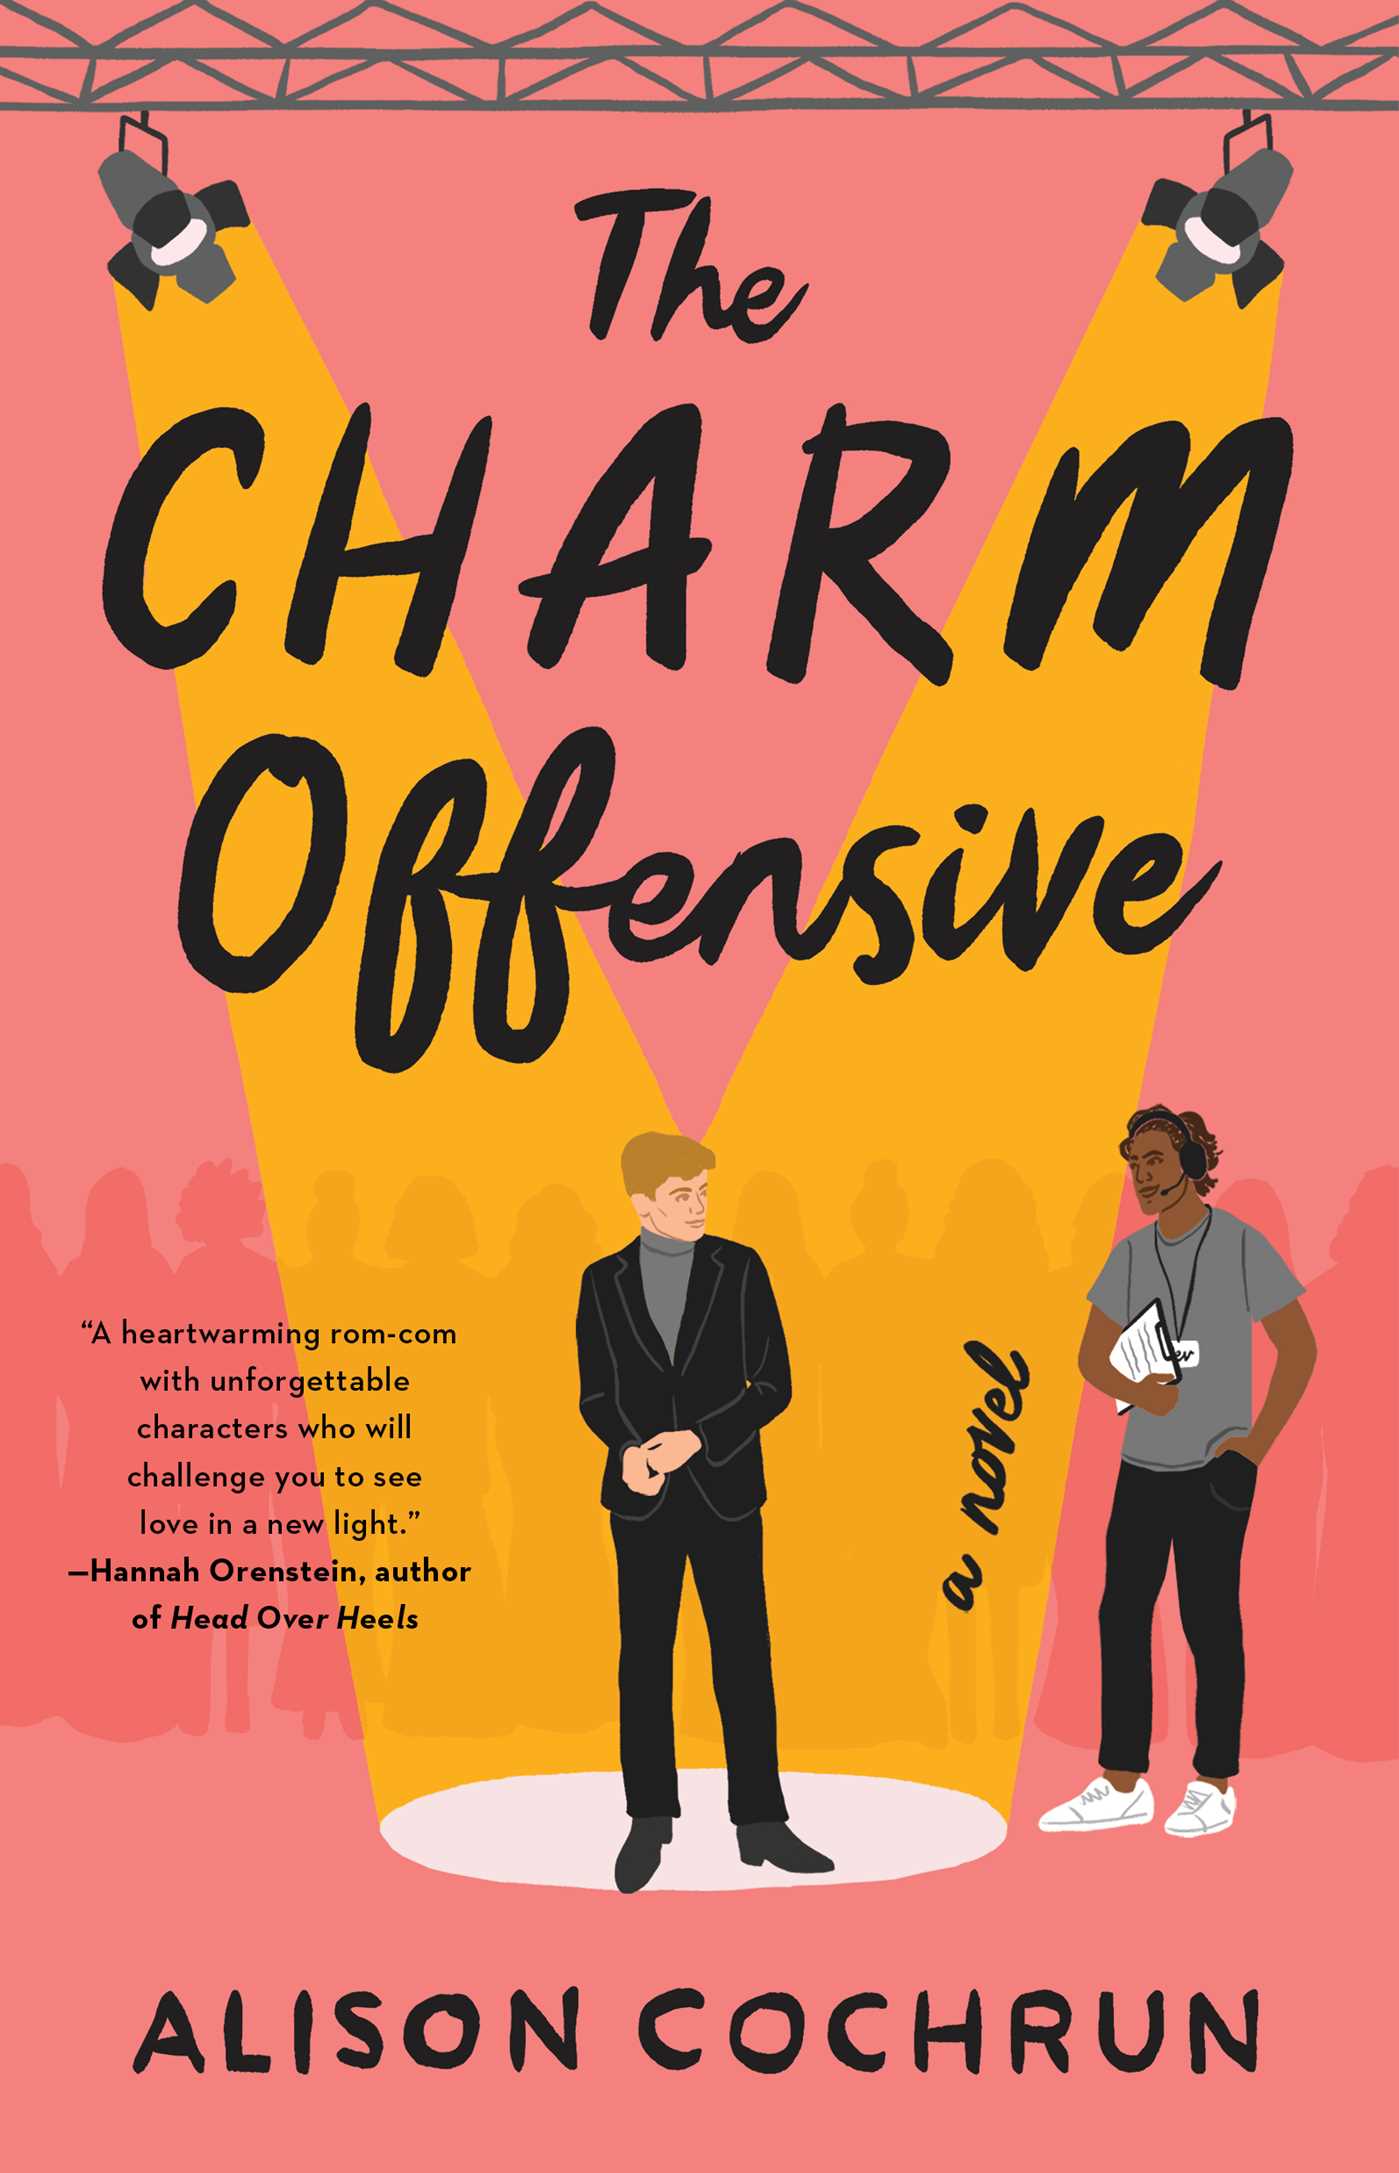 The Charm Offensive #1 Free ePub Download